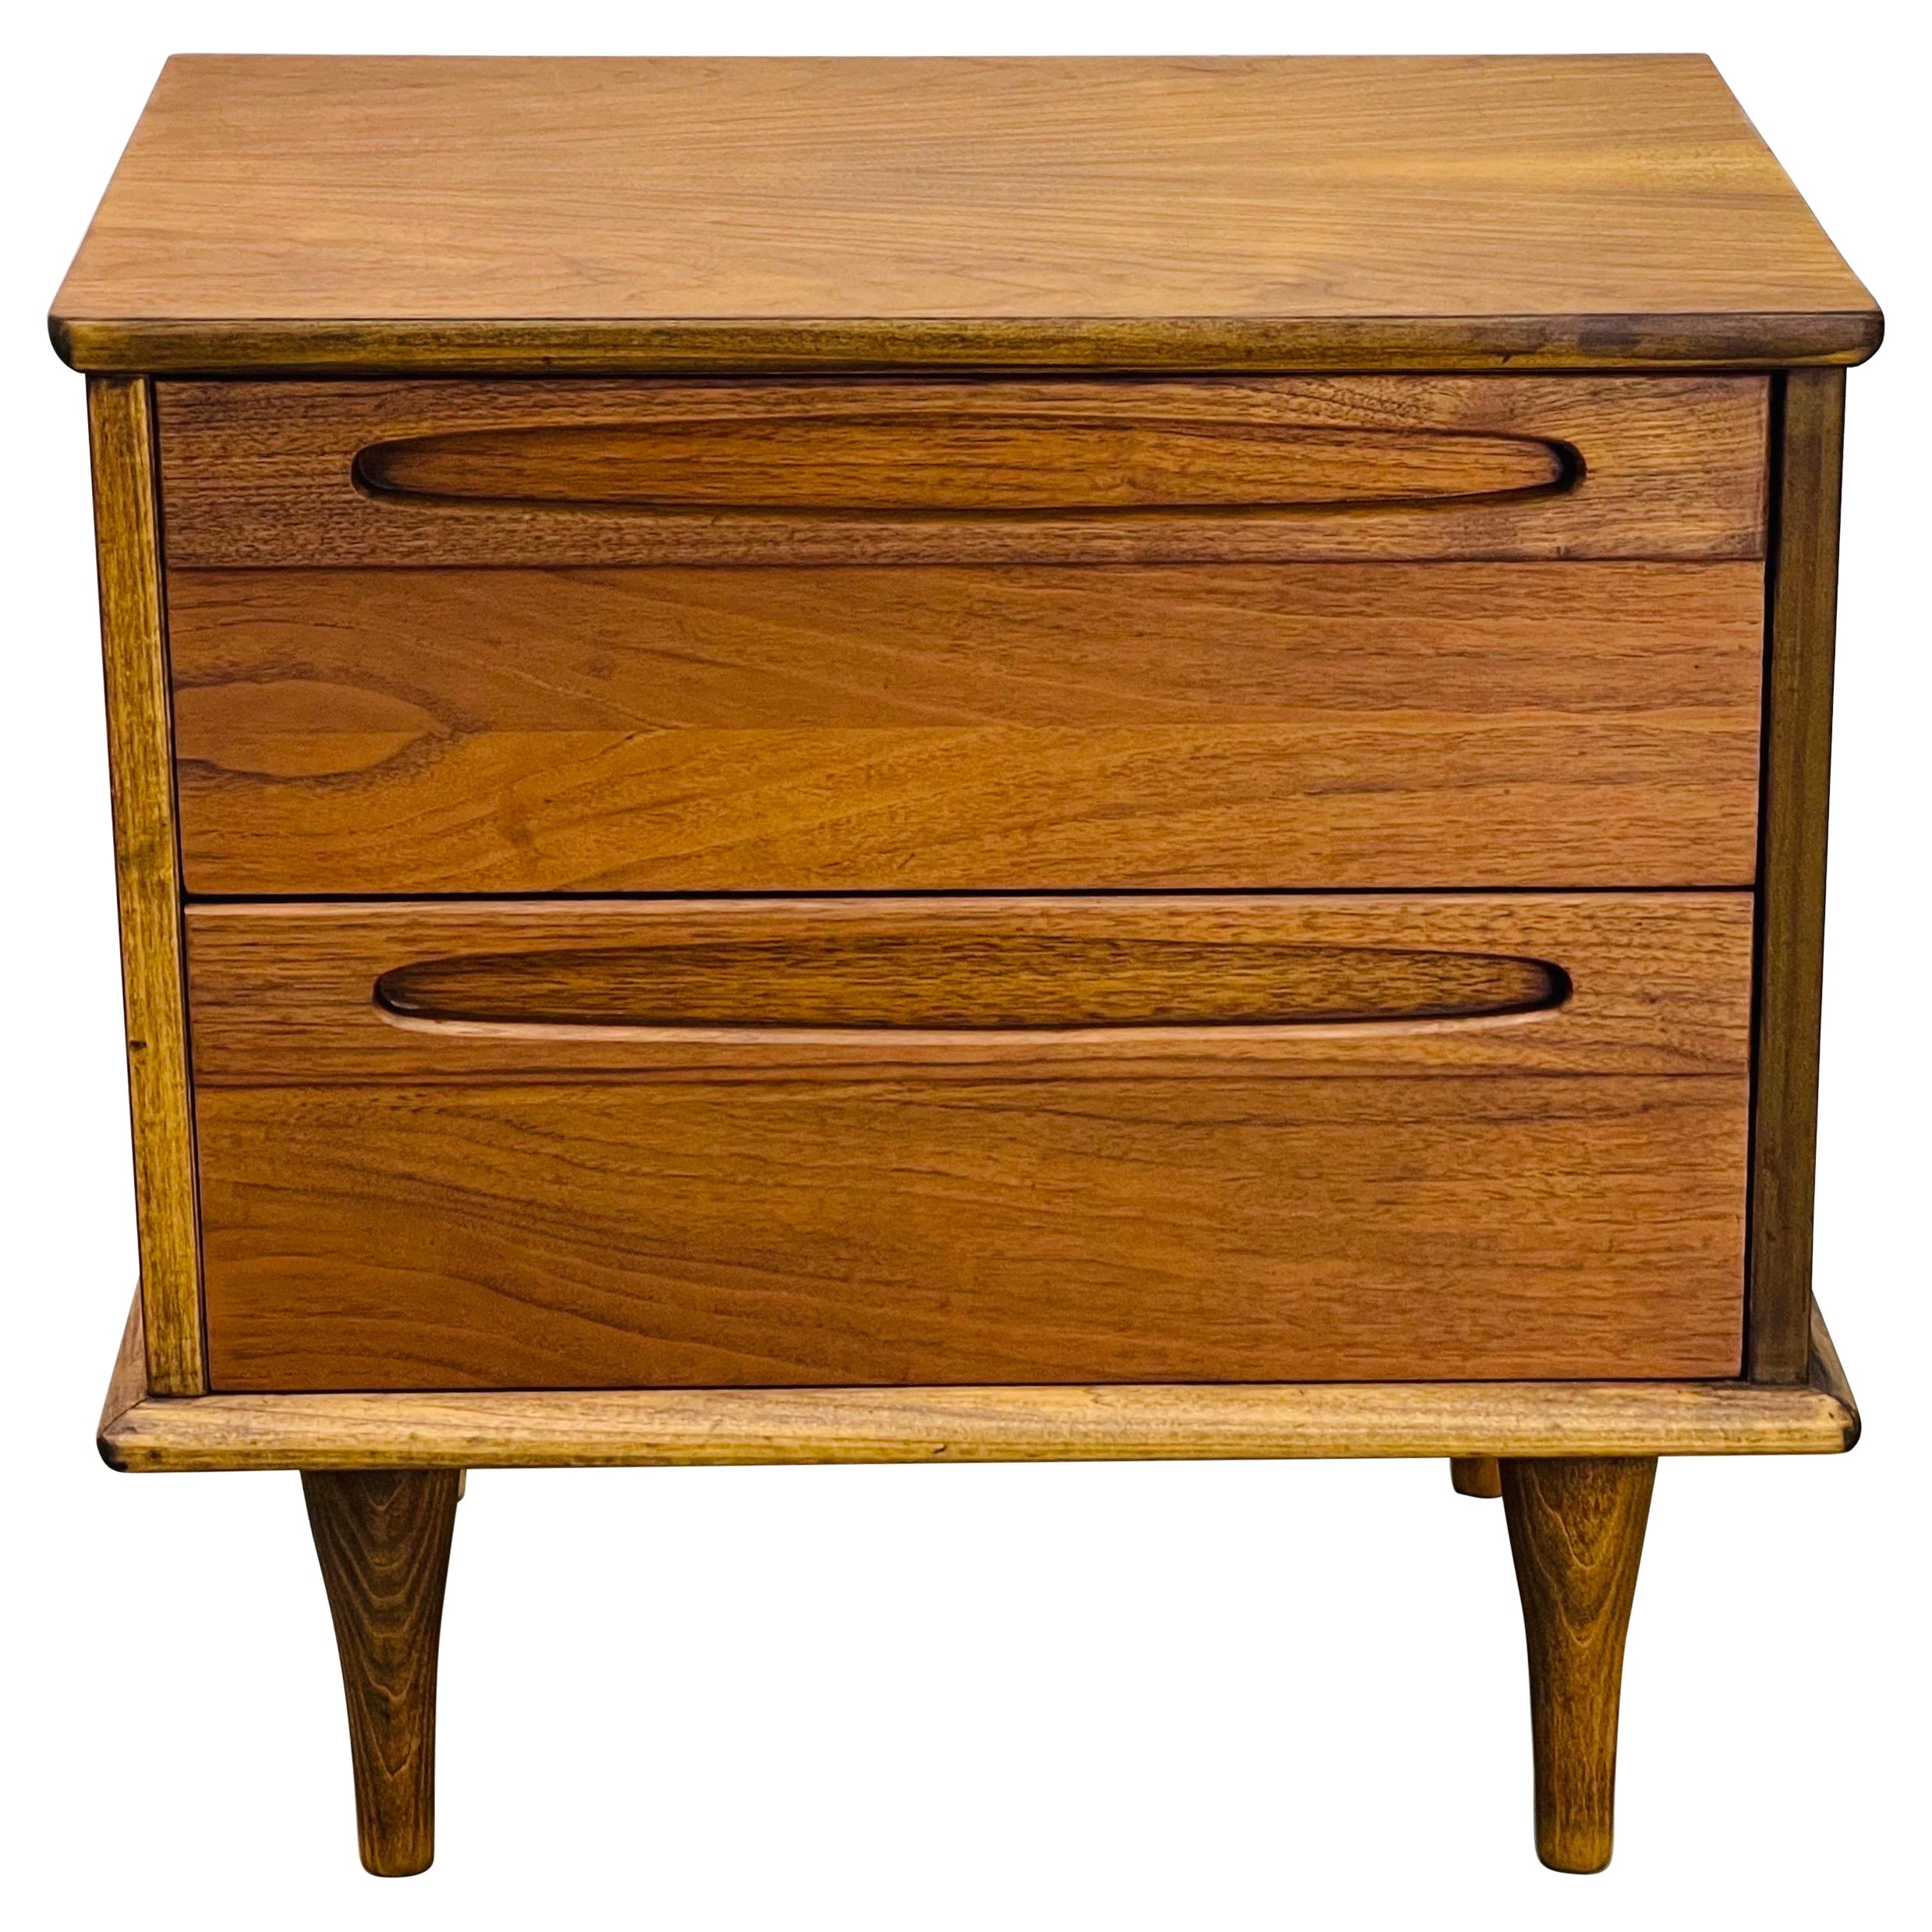 1960s, Walnut Wood Nightstand by American of Martinsville For Sale